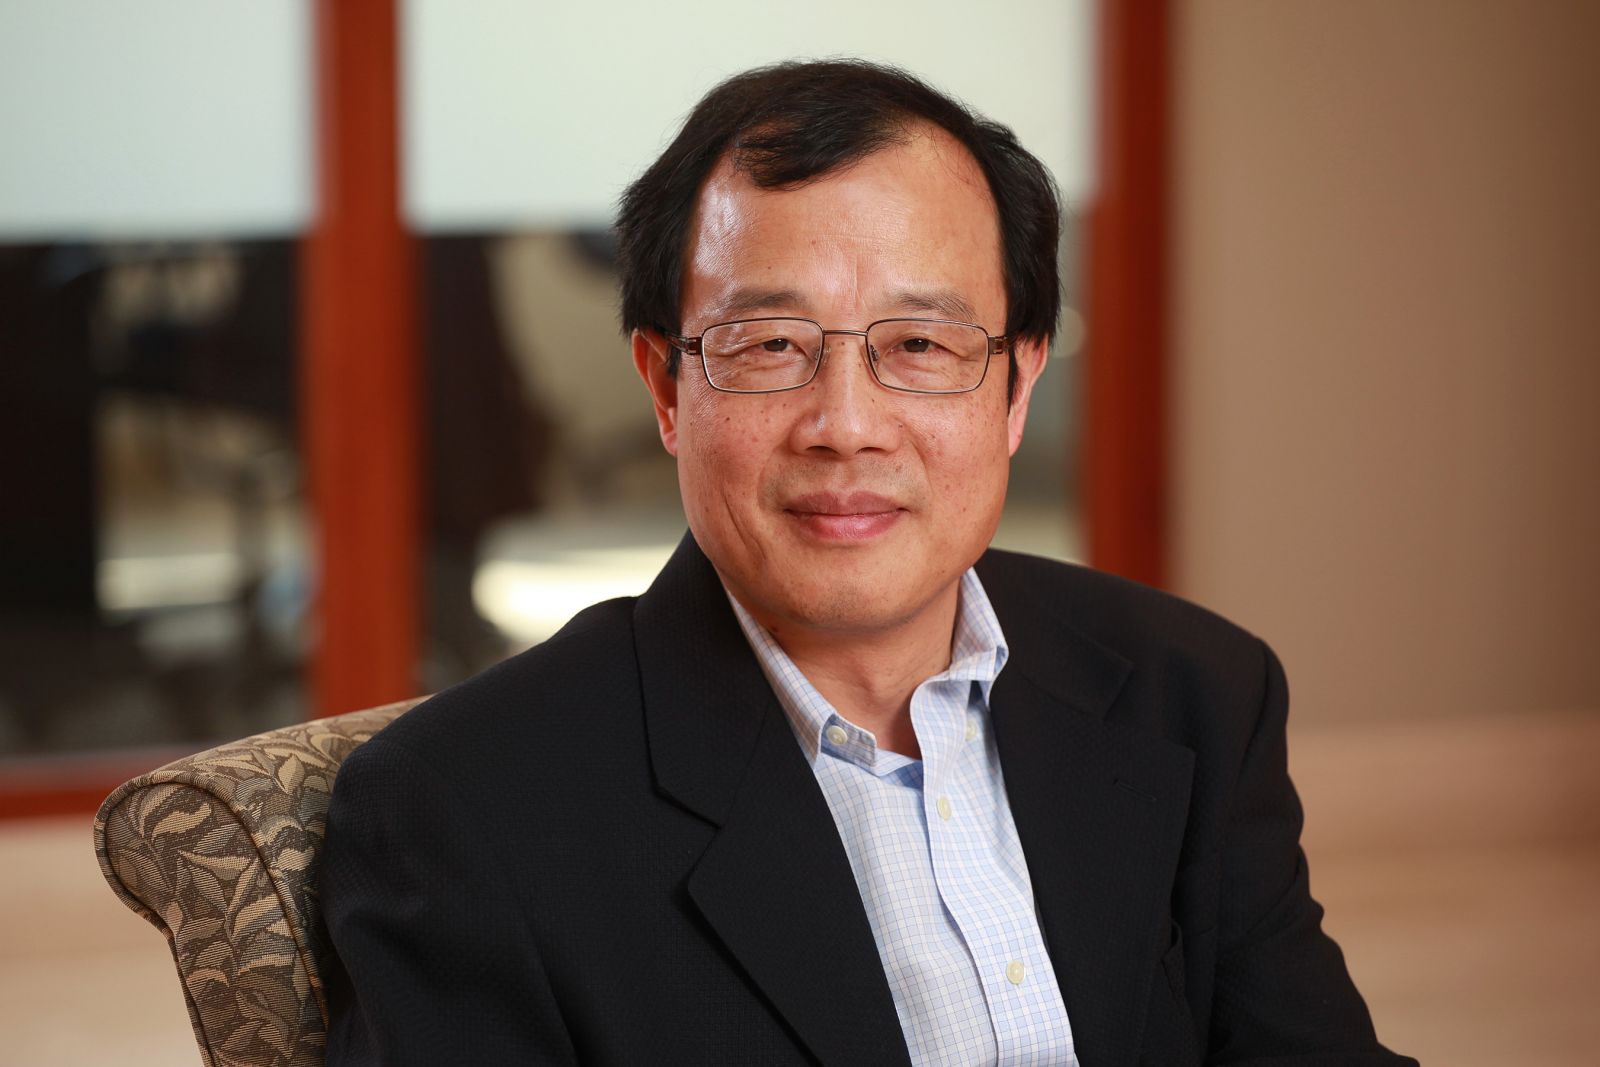 Dr. Liu is a Professor of Chemistry and a Tier 1 Canada Research Chair at Queen's University